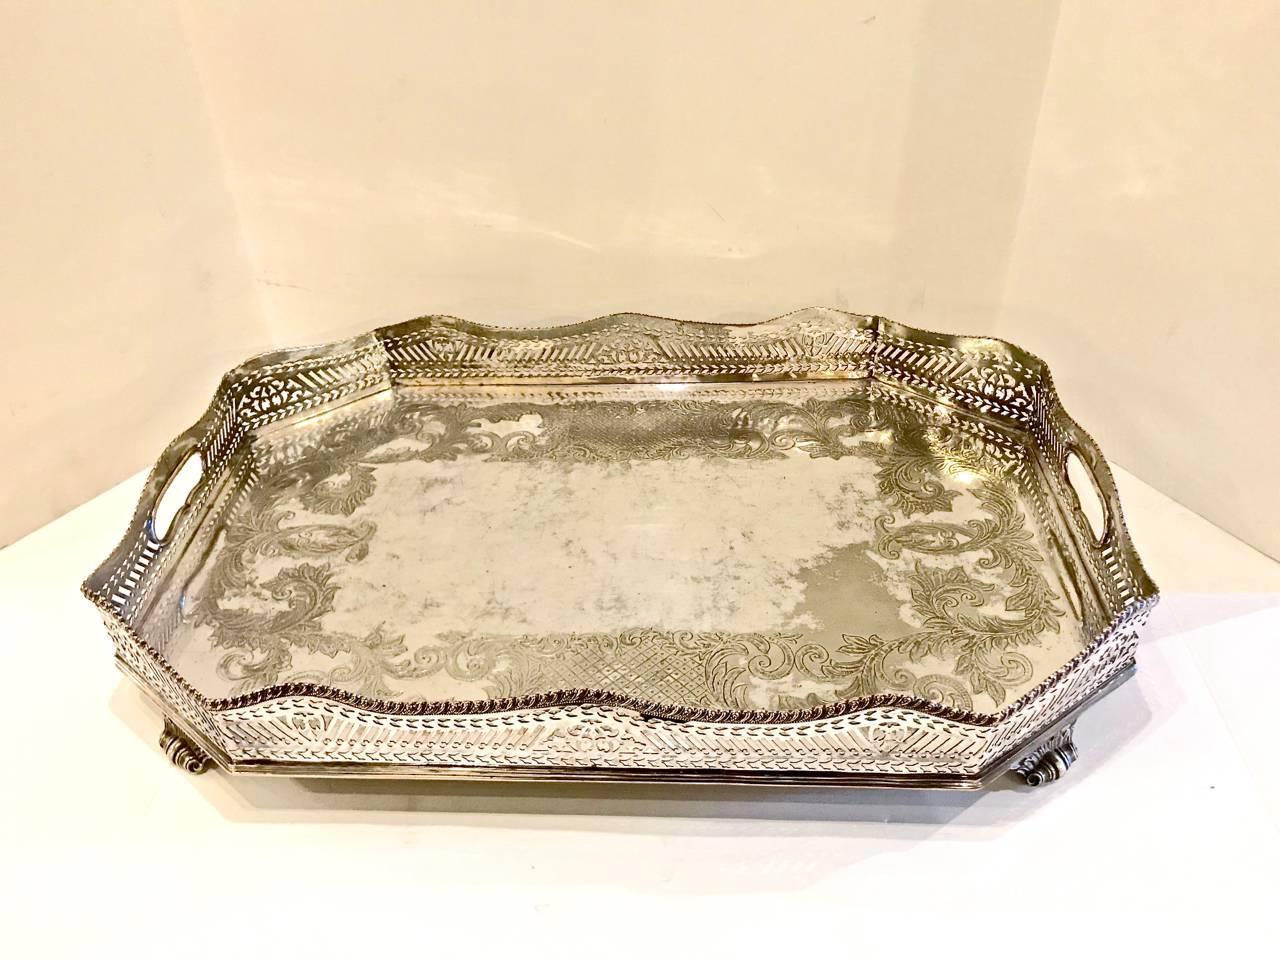 This is a 19th century (possibly early 20th century) large galleried Sheffield plate tray. The tray features a beautifully reticulated gallery and is further enhanced by acanthus scrolling feet. The tray is 8-sided and is further detailed with